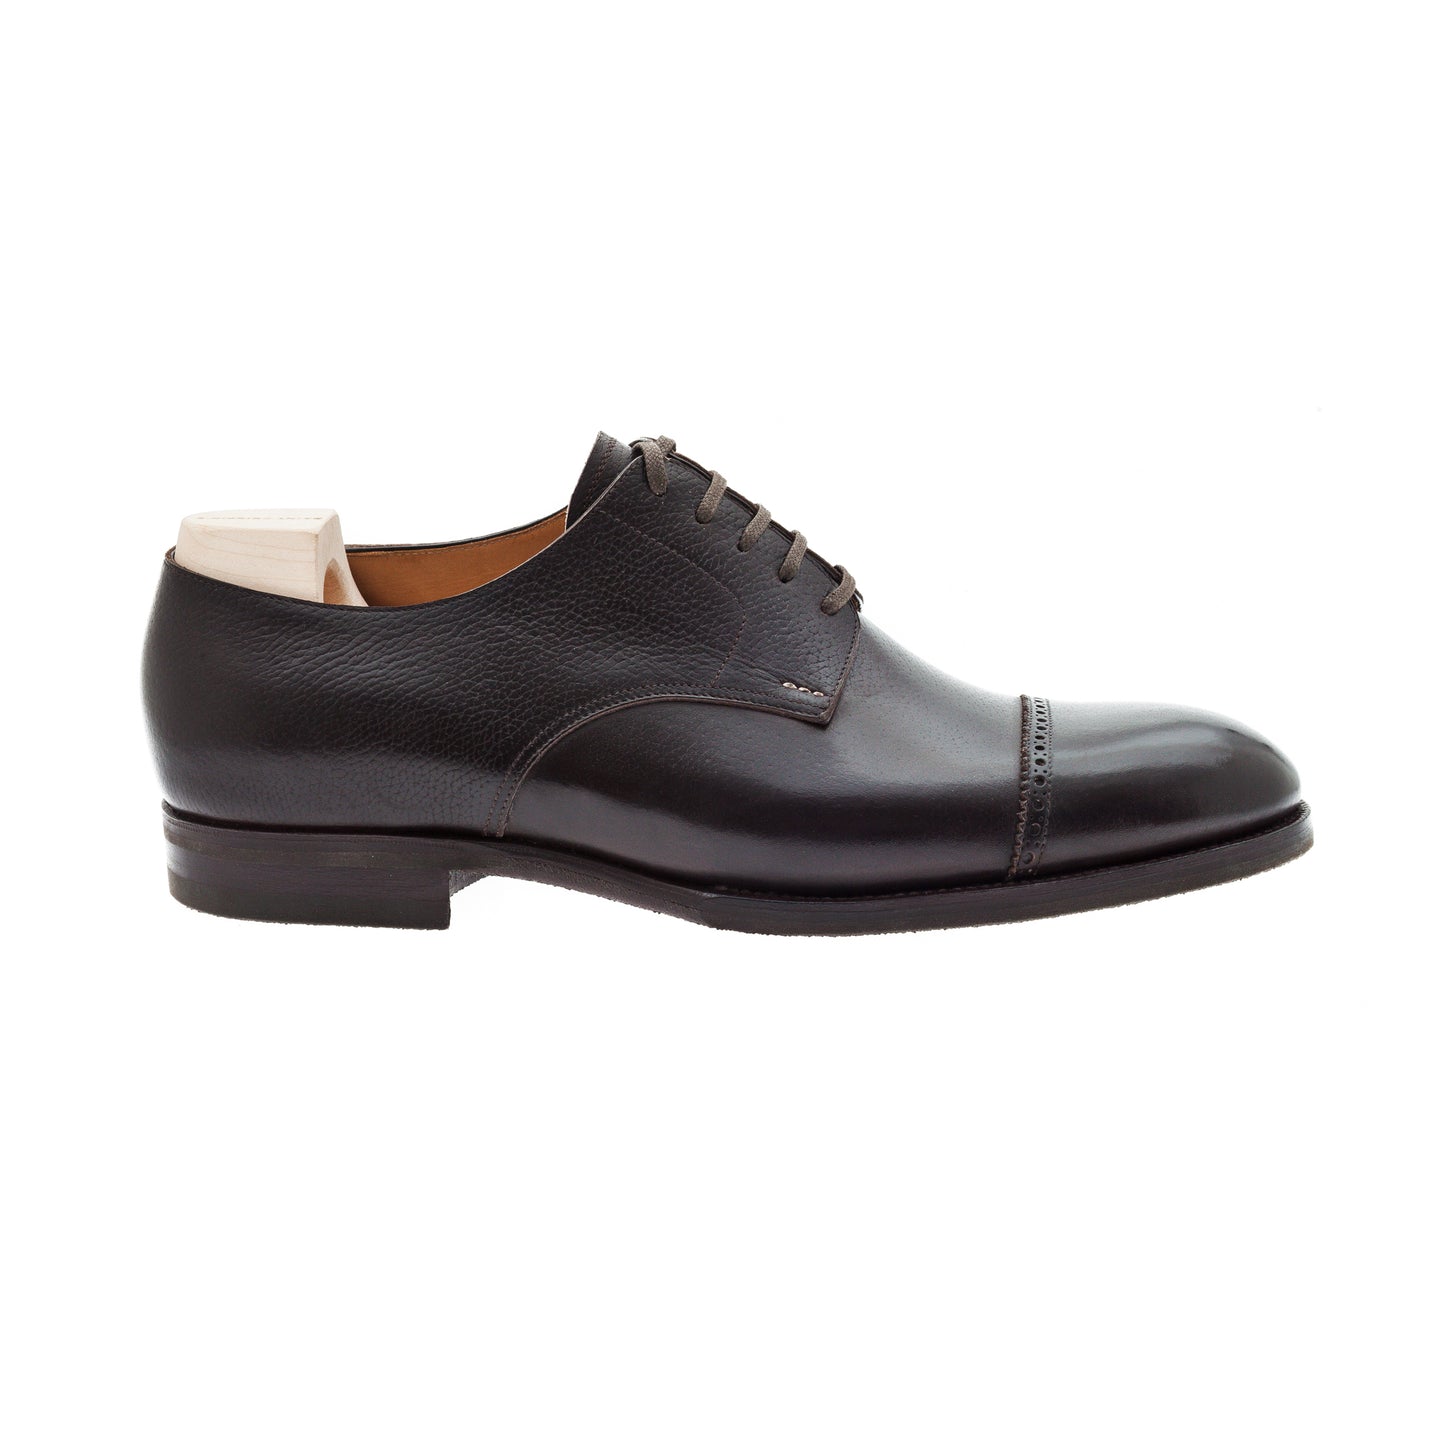 Five eyelets Derby with straight toe cap